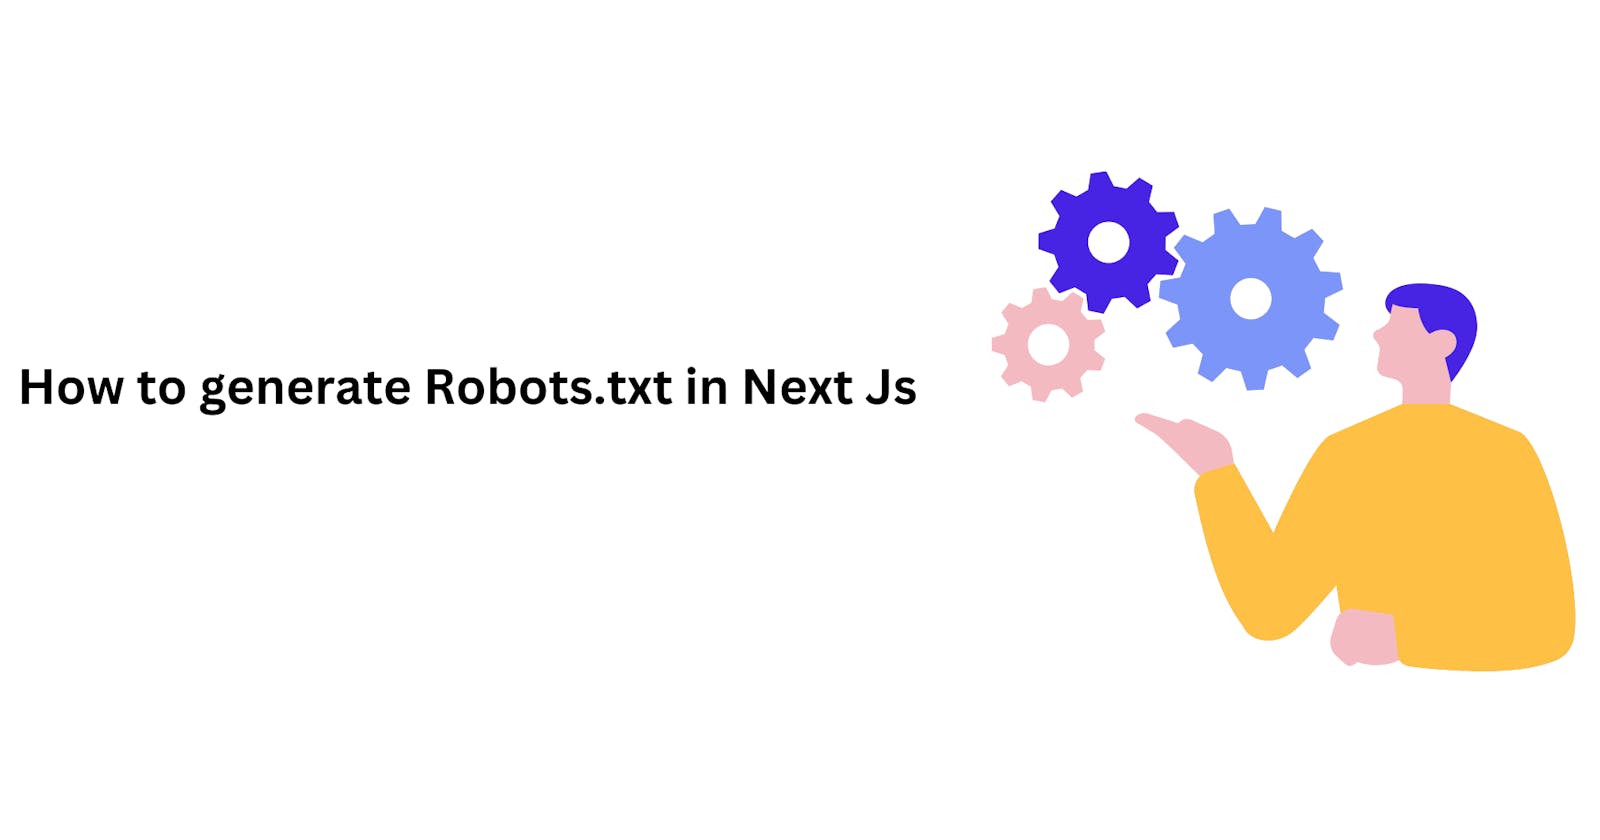 How to generate Robots.txt in Next Js